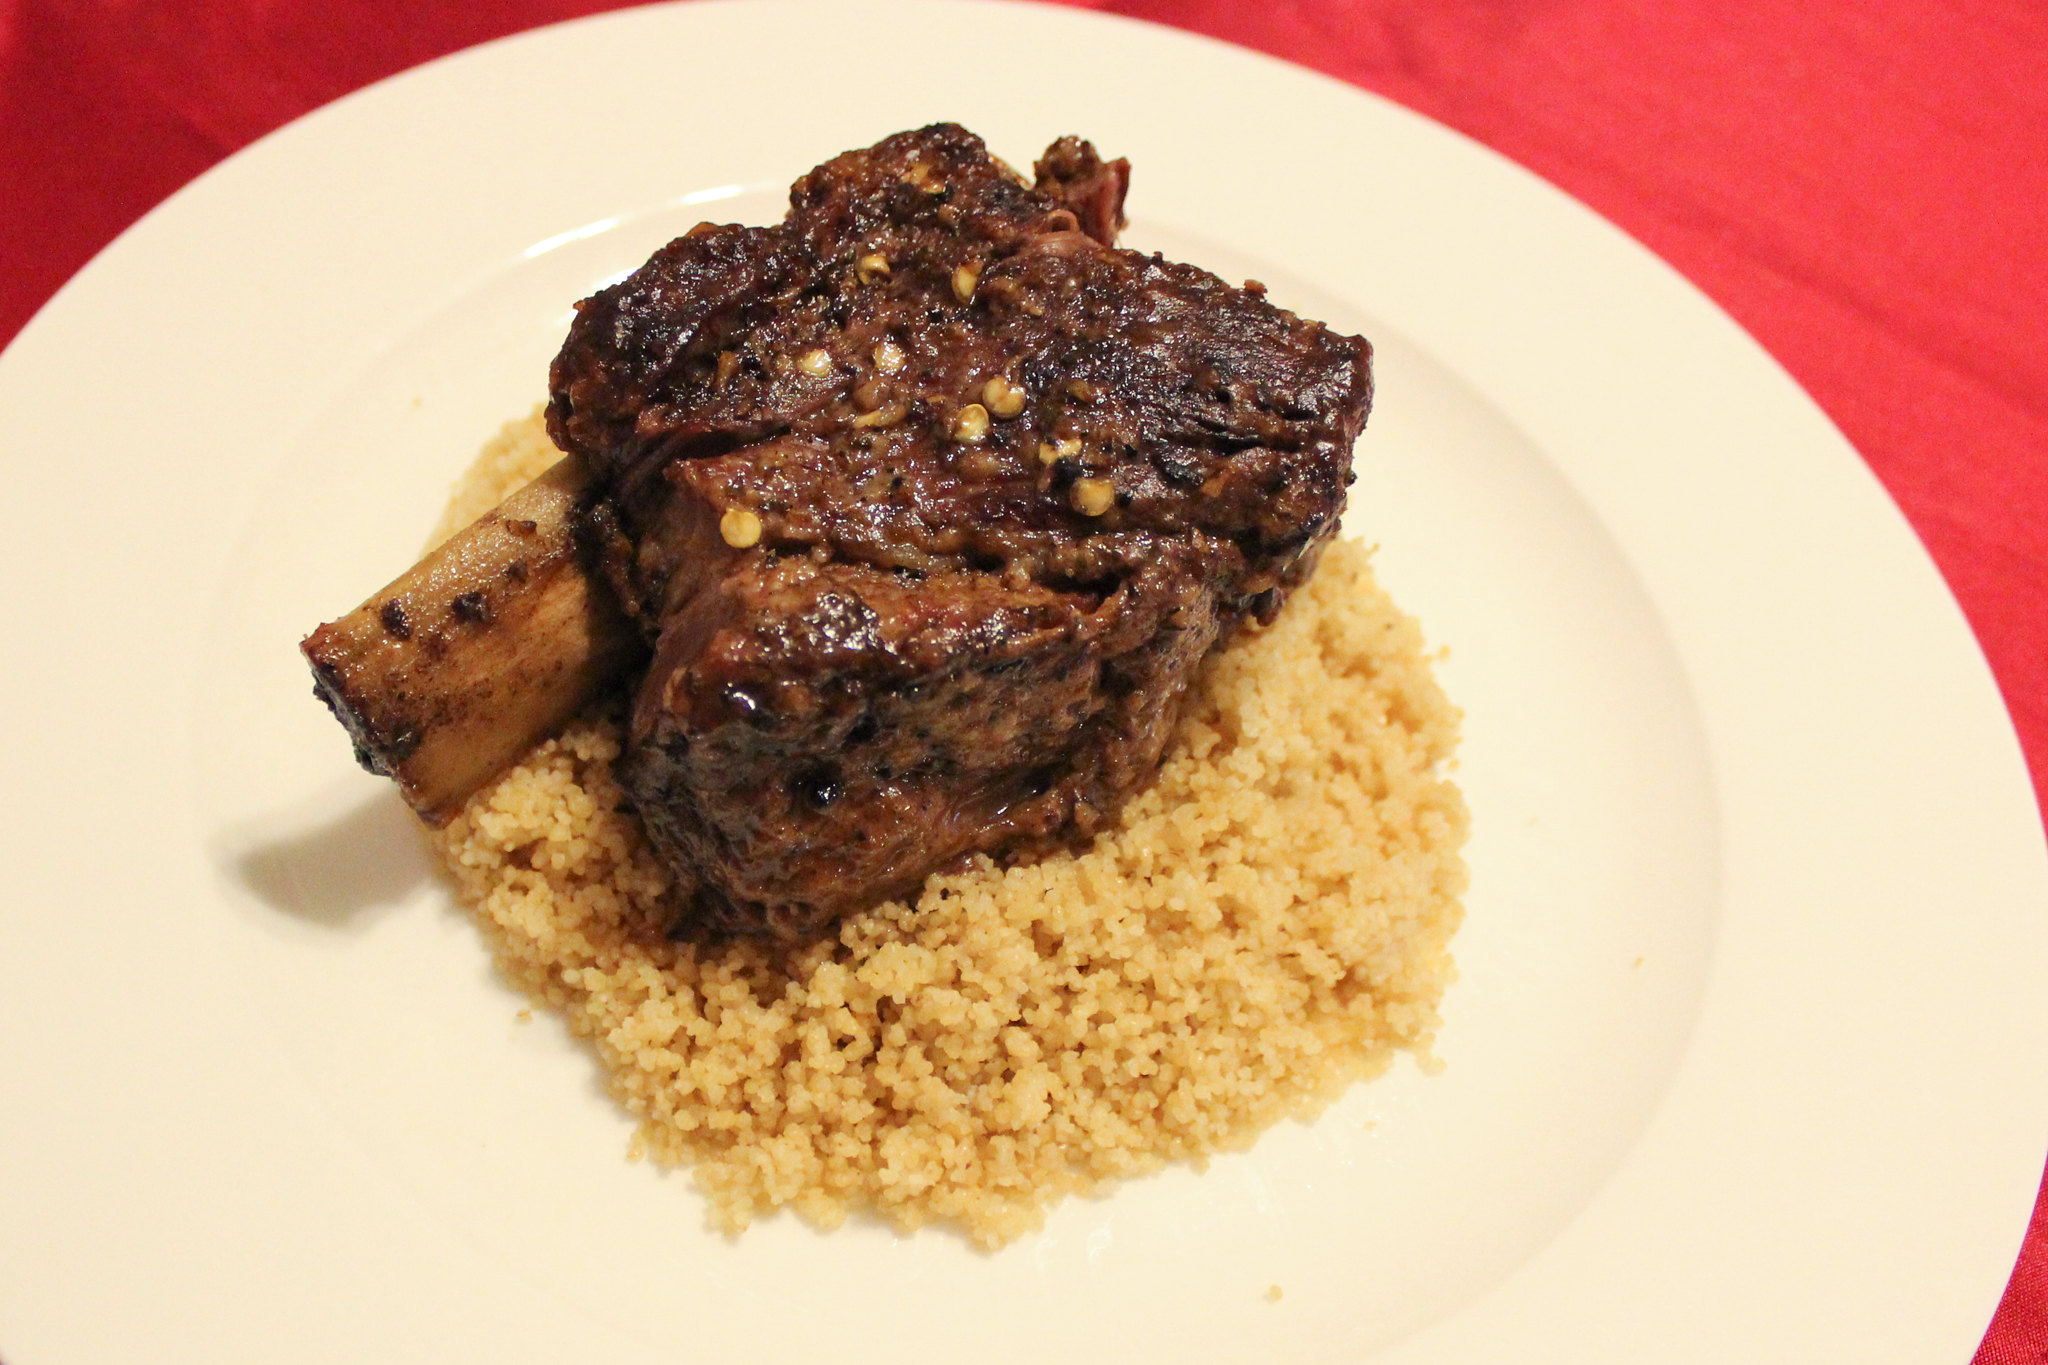 Braised short rib with couscous